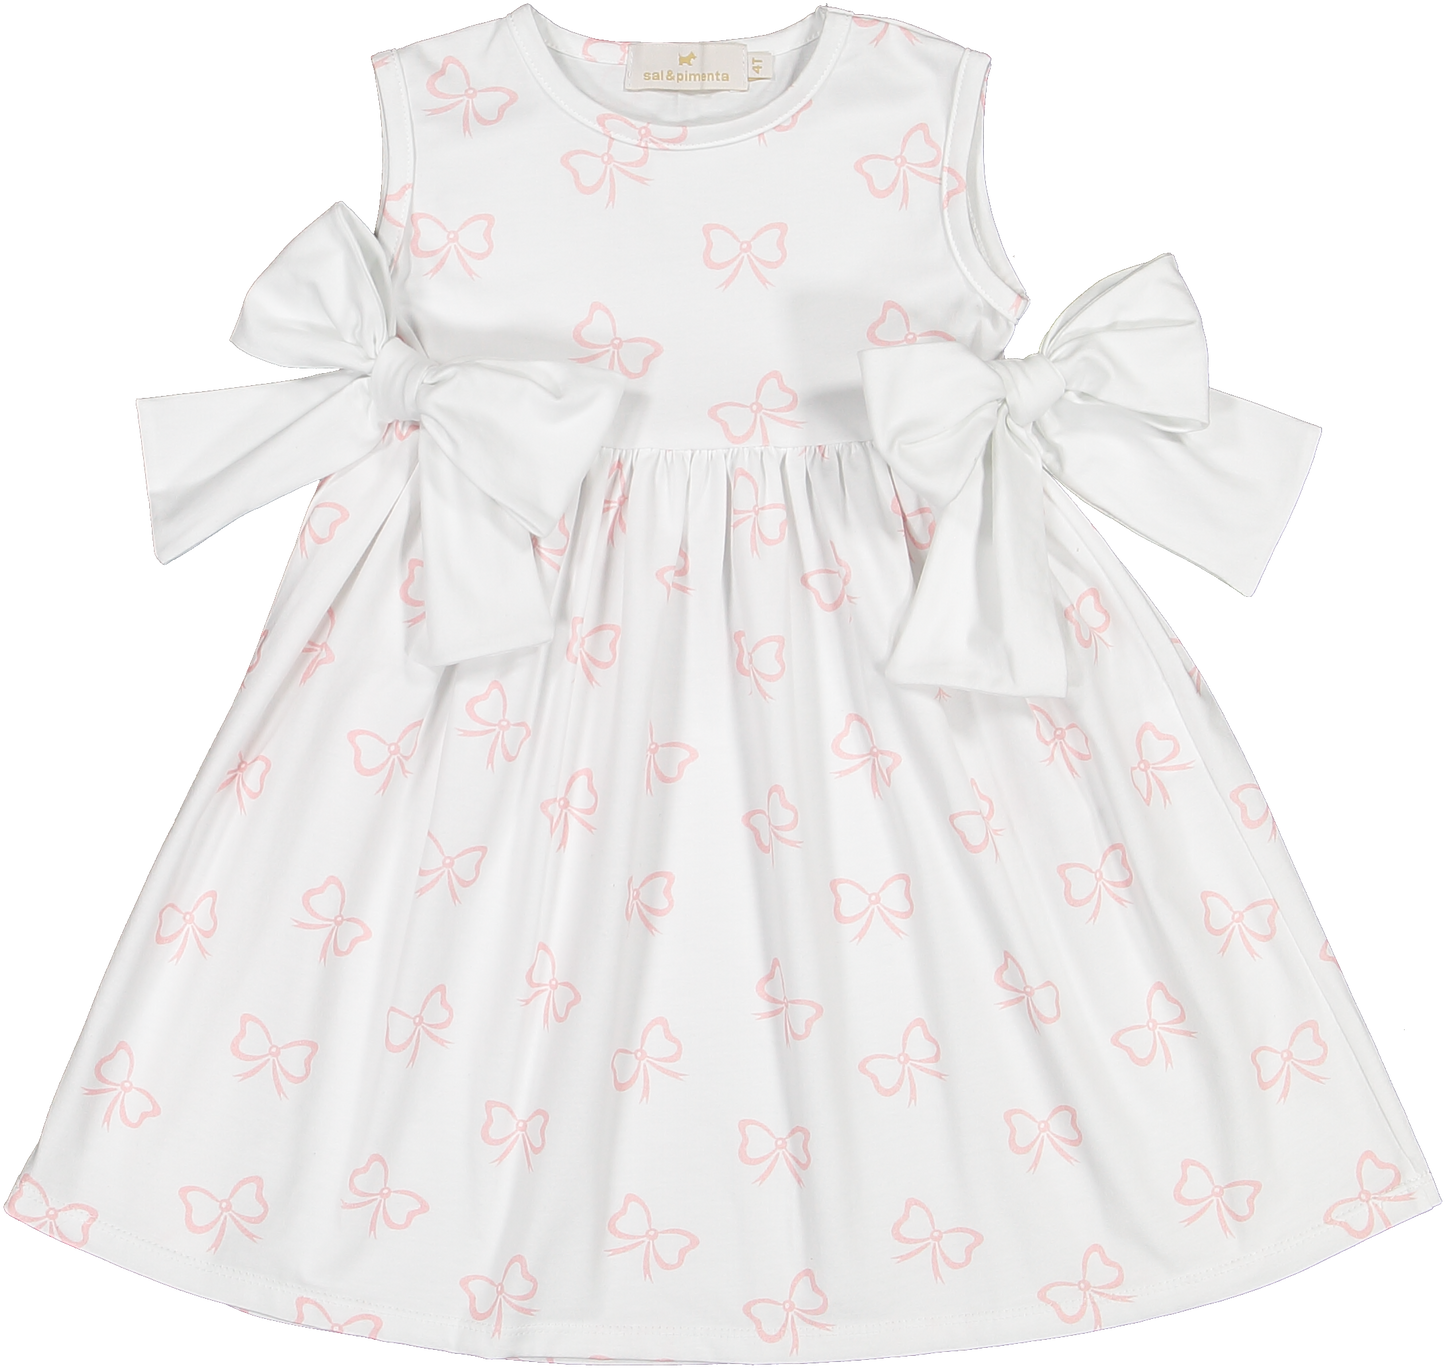 Sal and Pimenta Pink Bows A-Line Dress